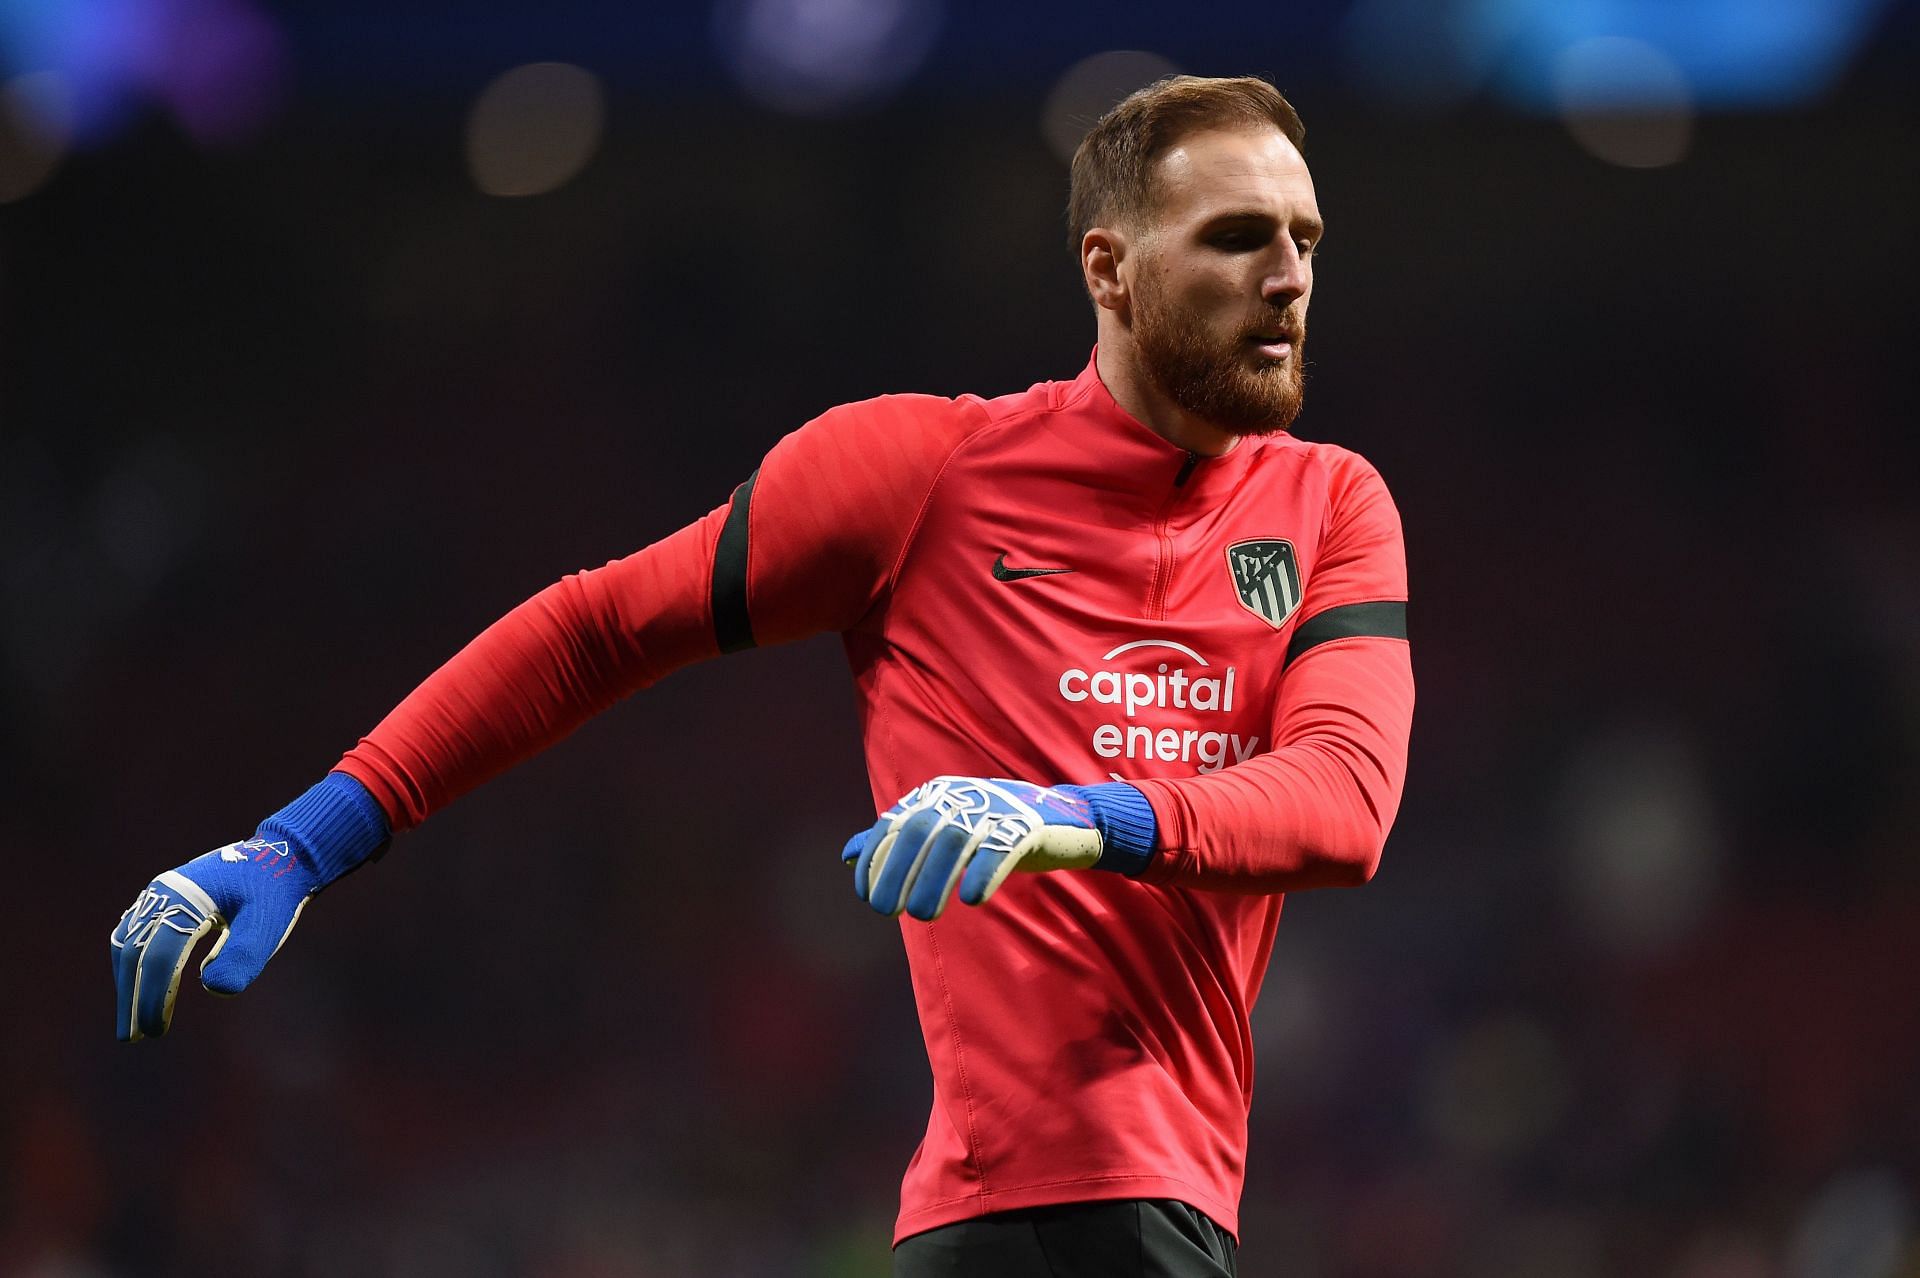 Jan Oblak has been an excellent performer for Atletico